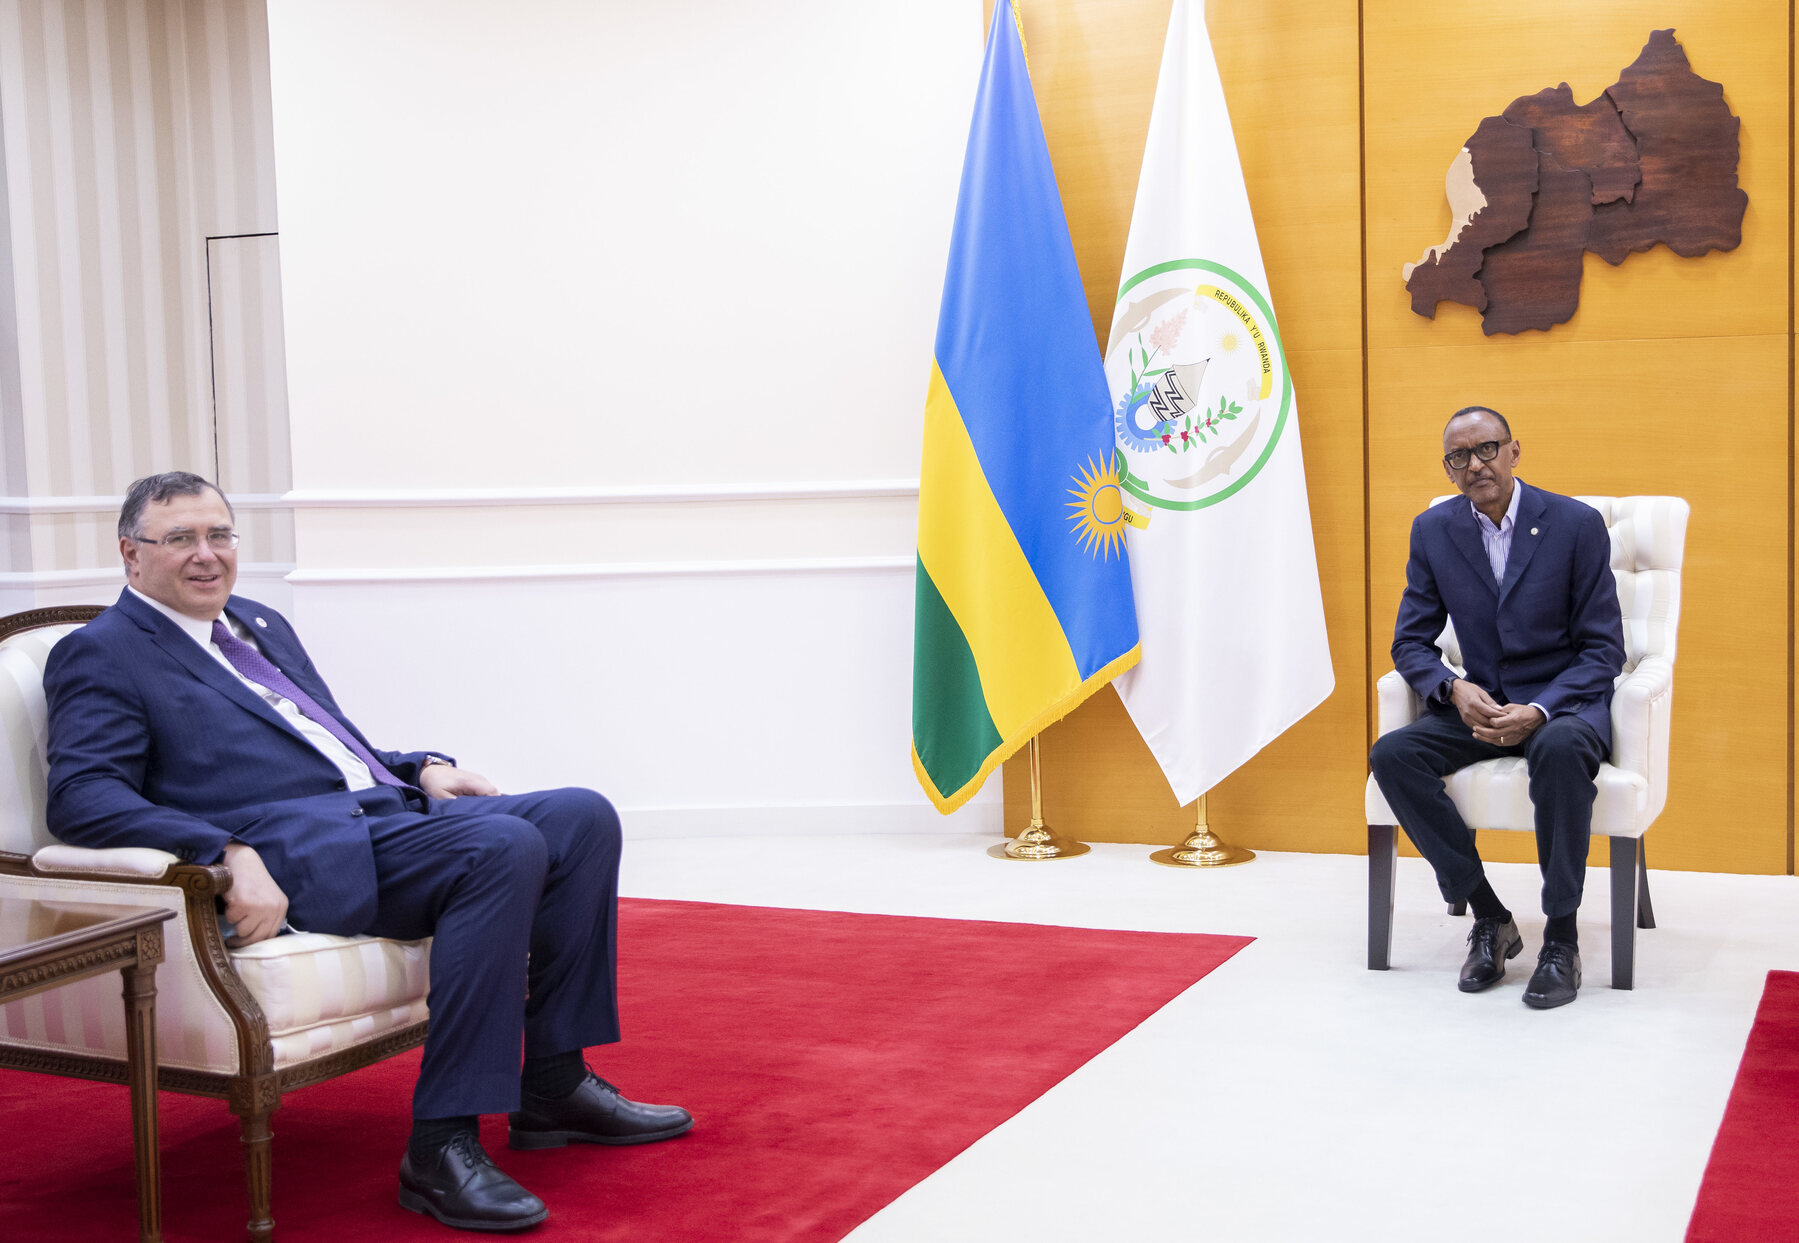 President Paul Kagame with Chairman and CEO of TotalEnergies Patrick Pouyannu00e9 in Kigali on January 30, 2022. 